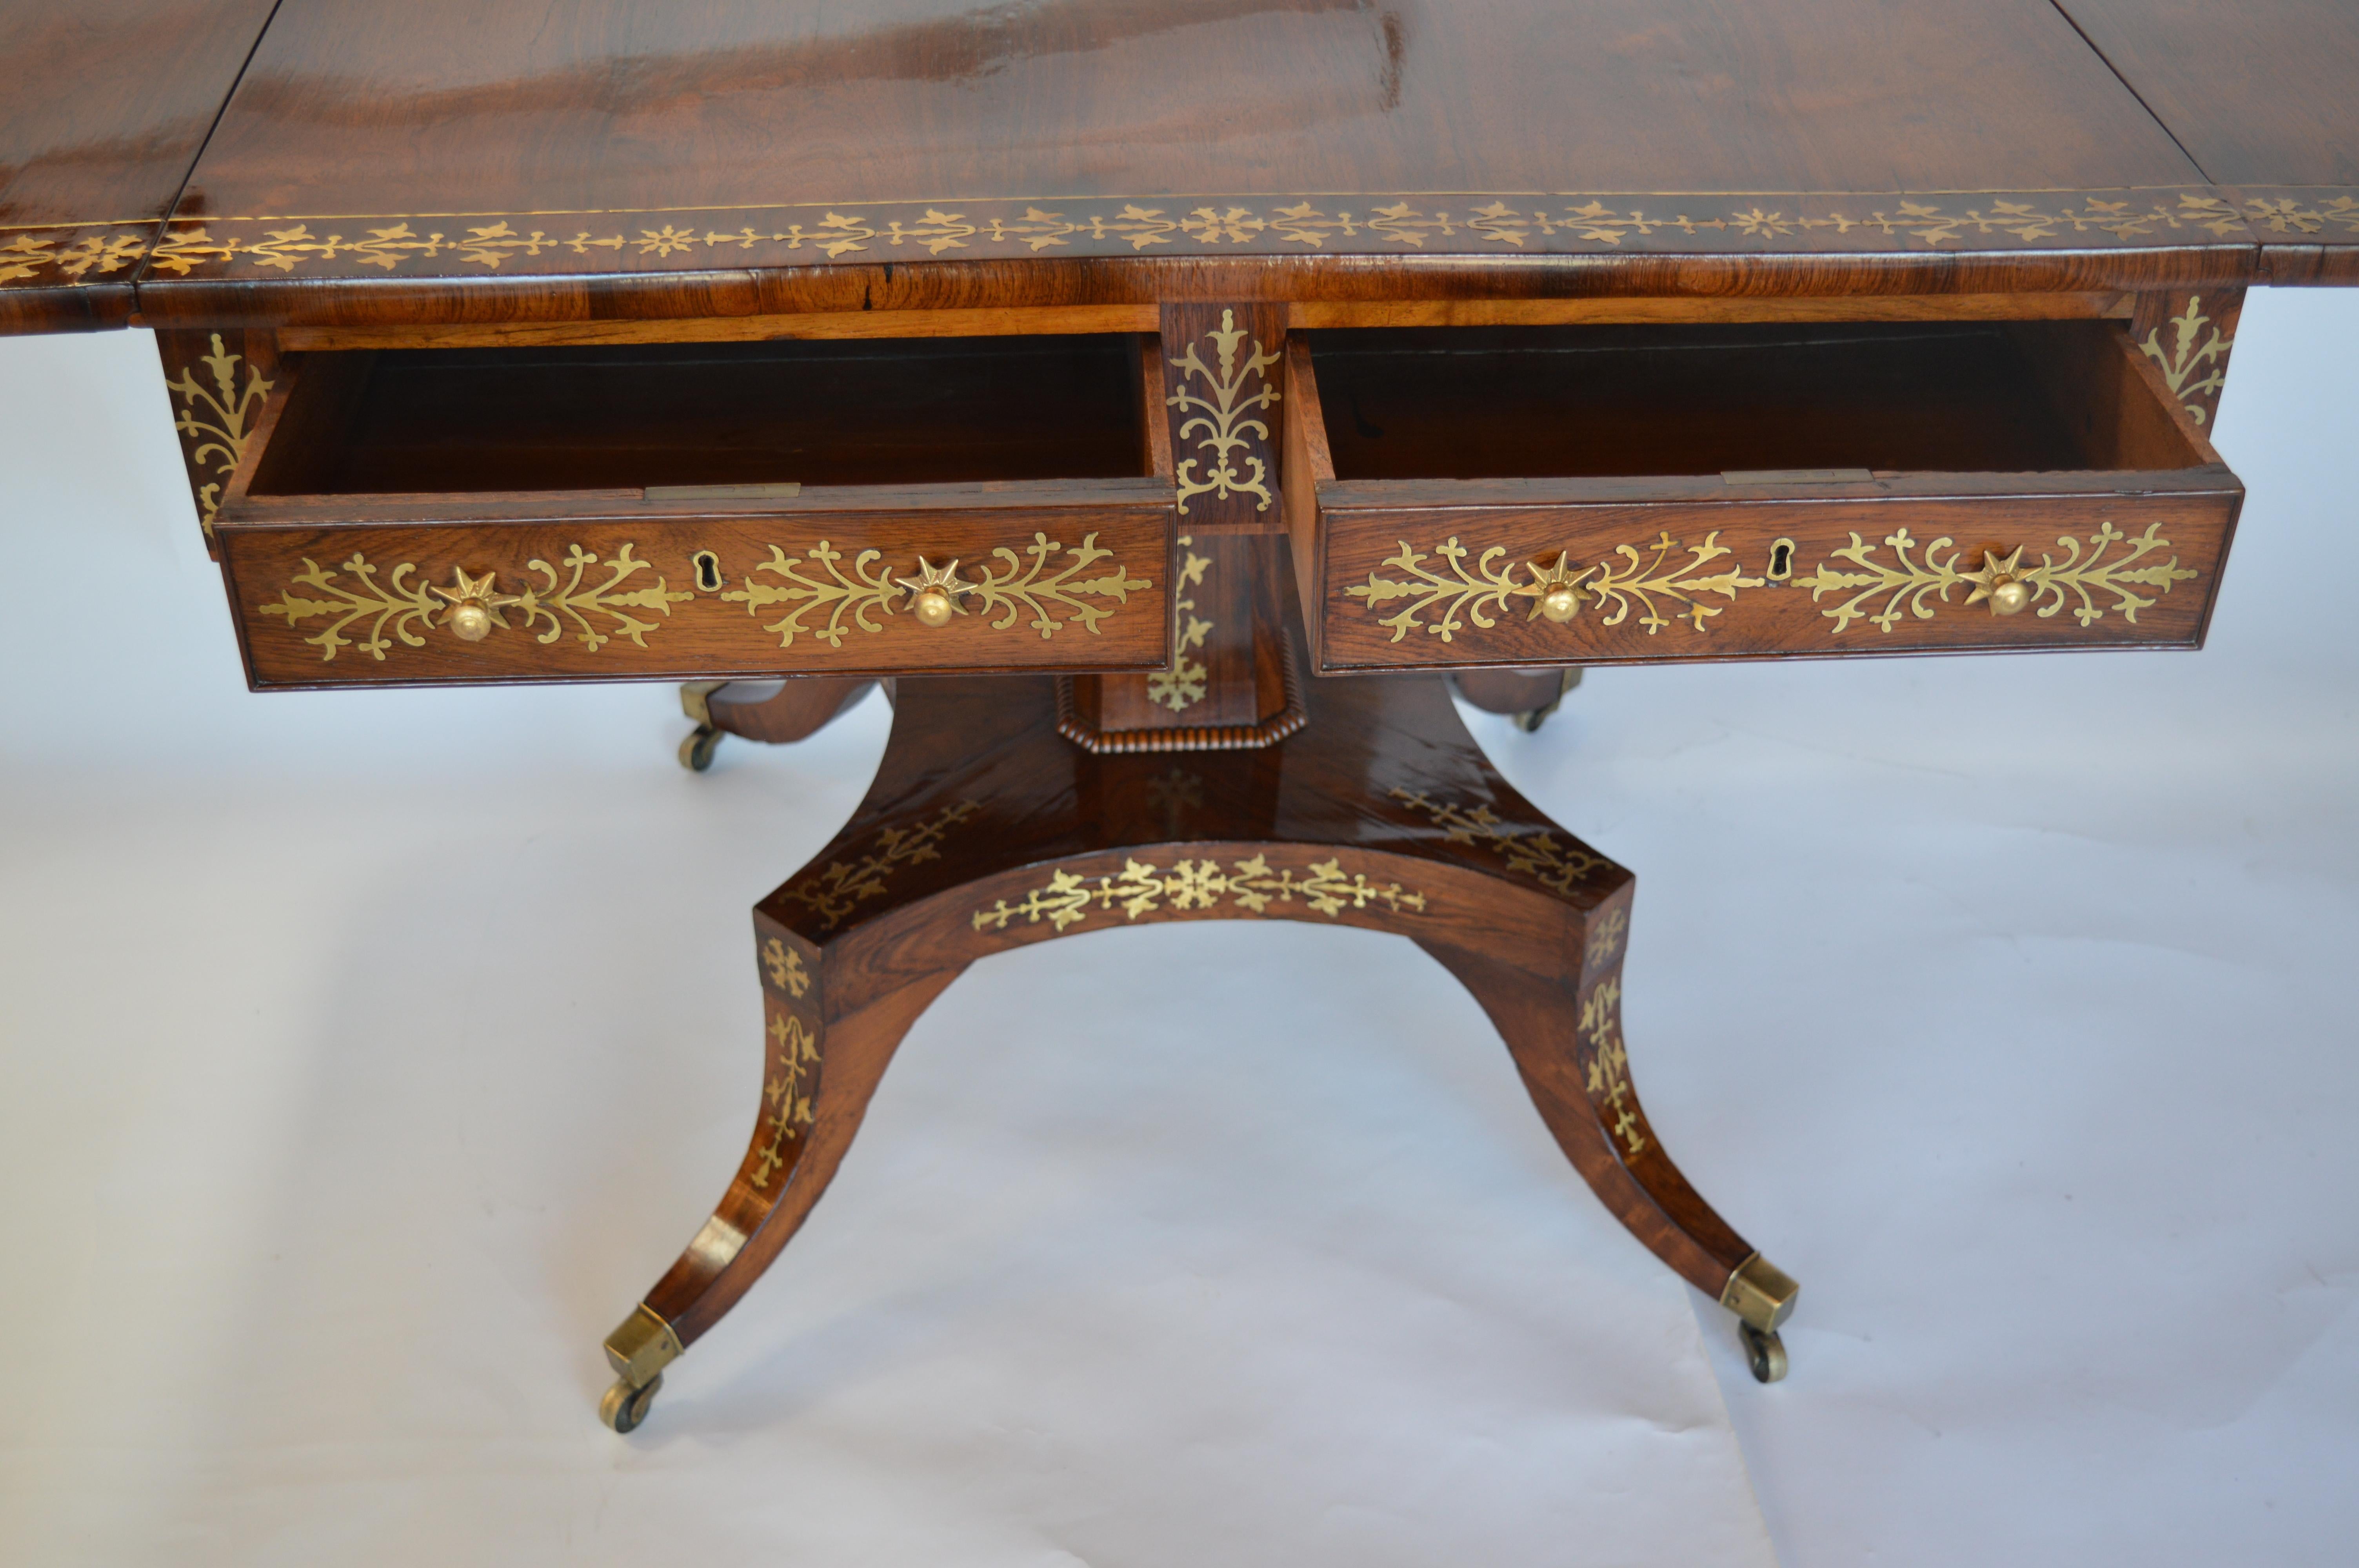 Regency Rosewood Pedestal Table with Brass Inlaid For Sale 1